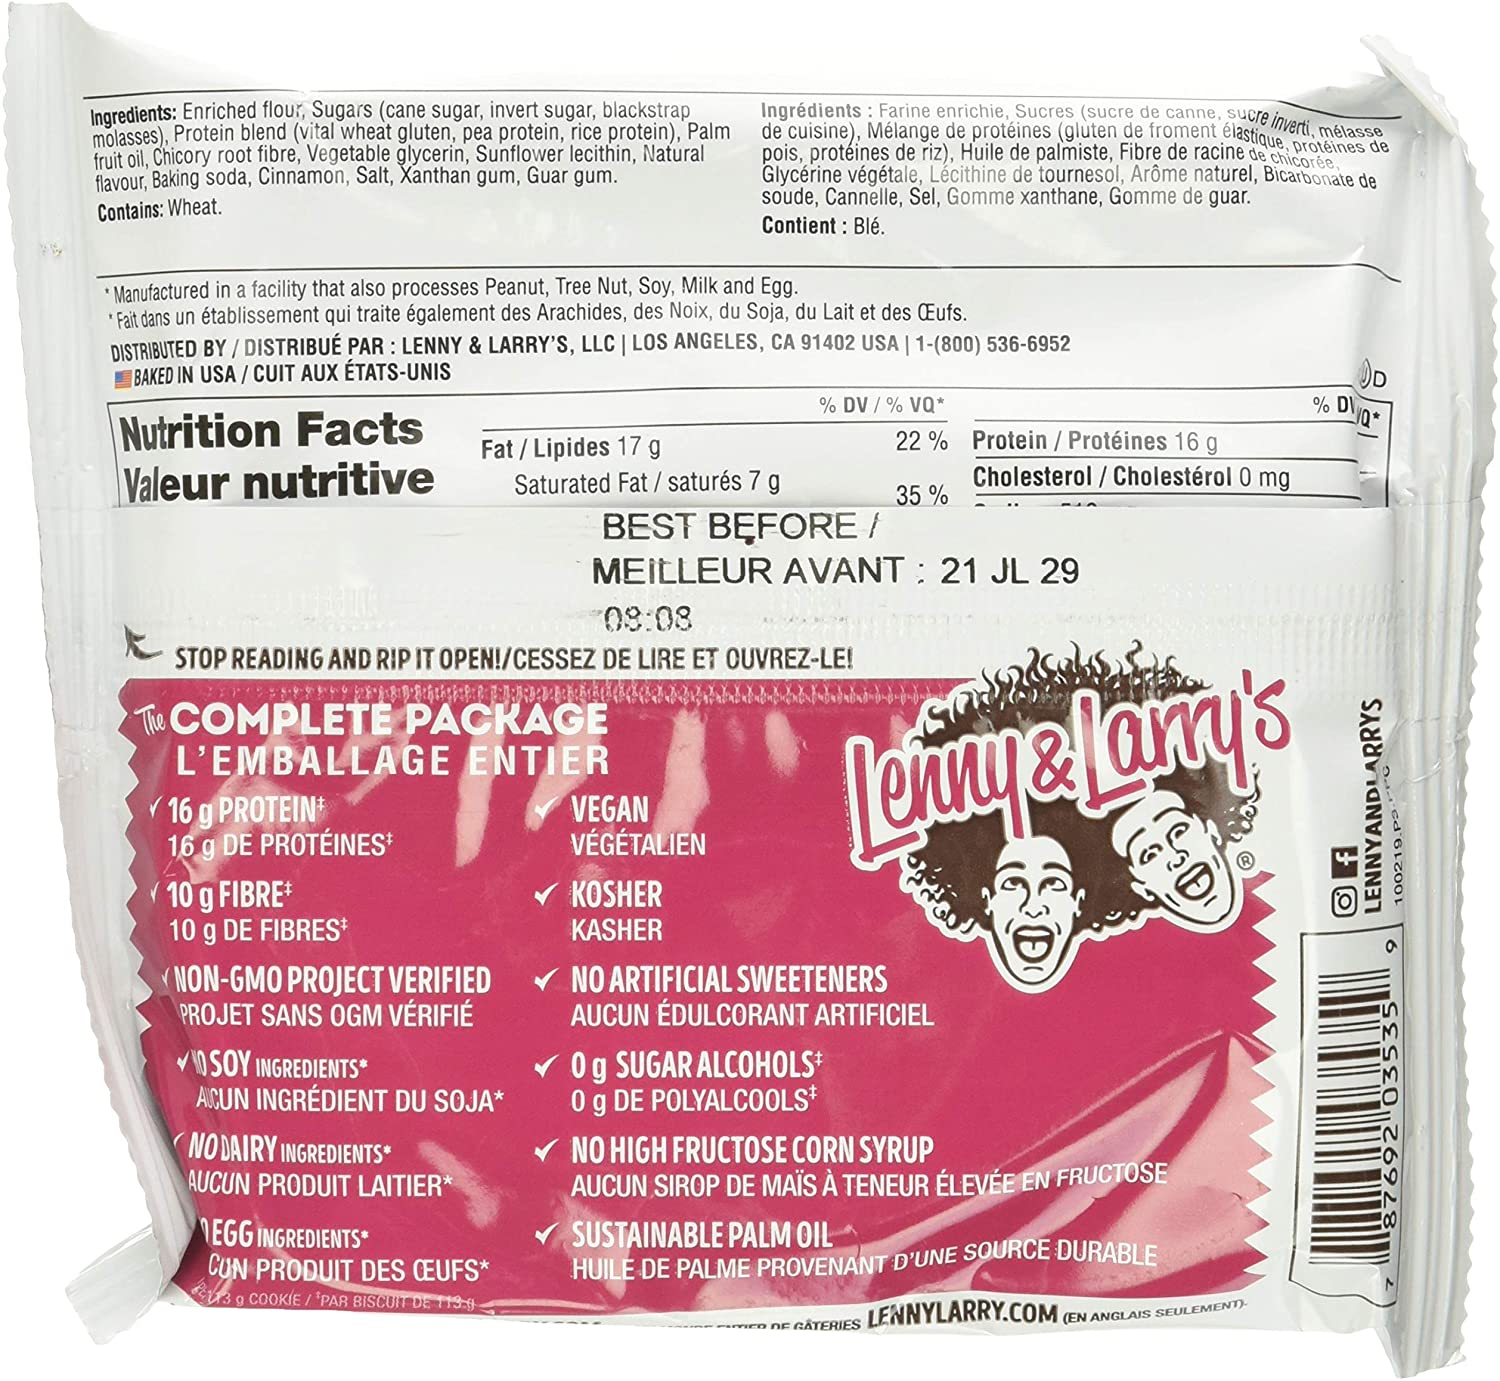 Lenny & Larry's Complete Cookie Snickerdoodle / Pack of 12